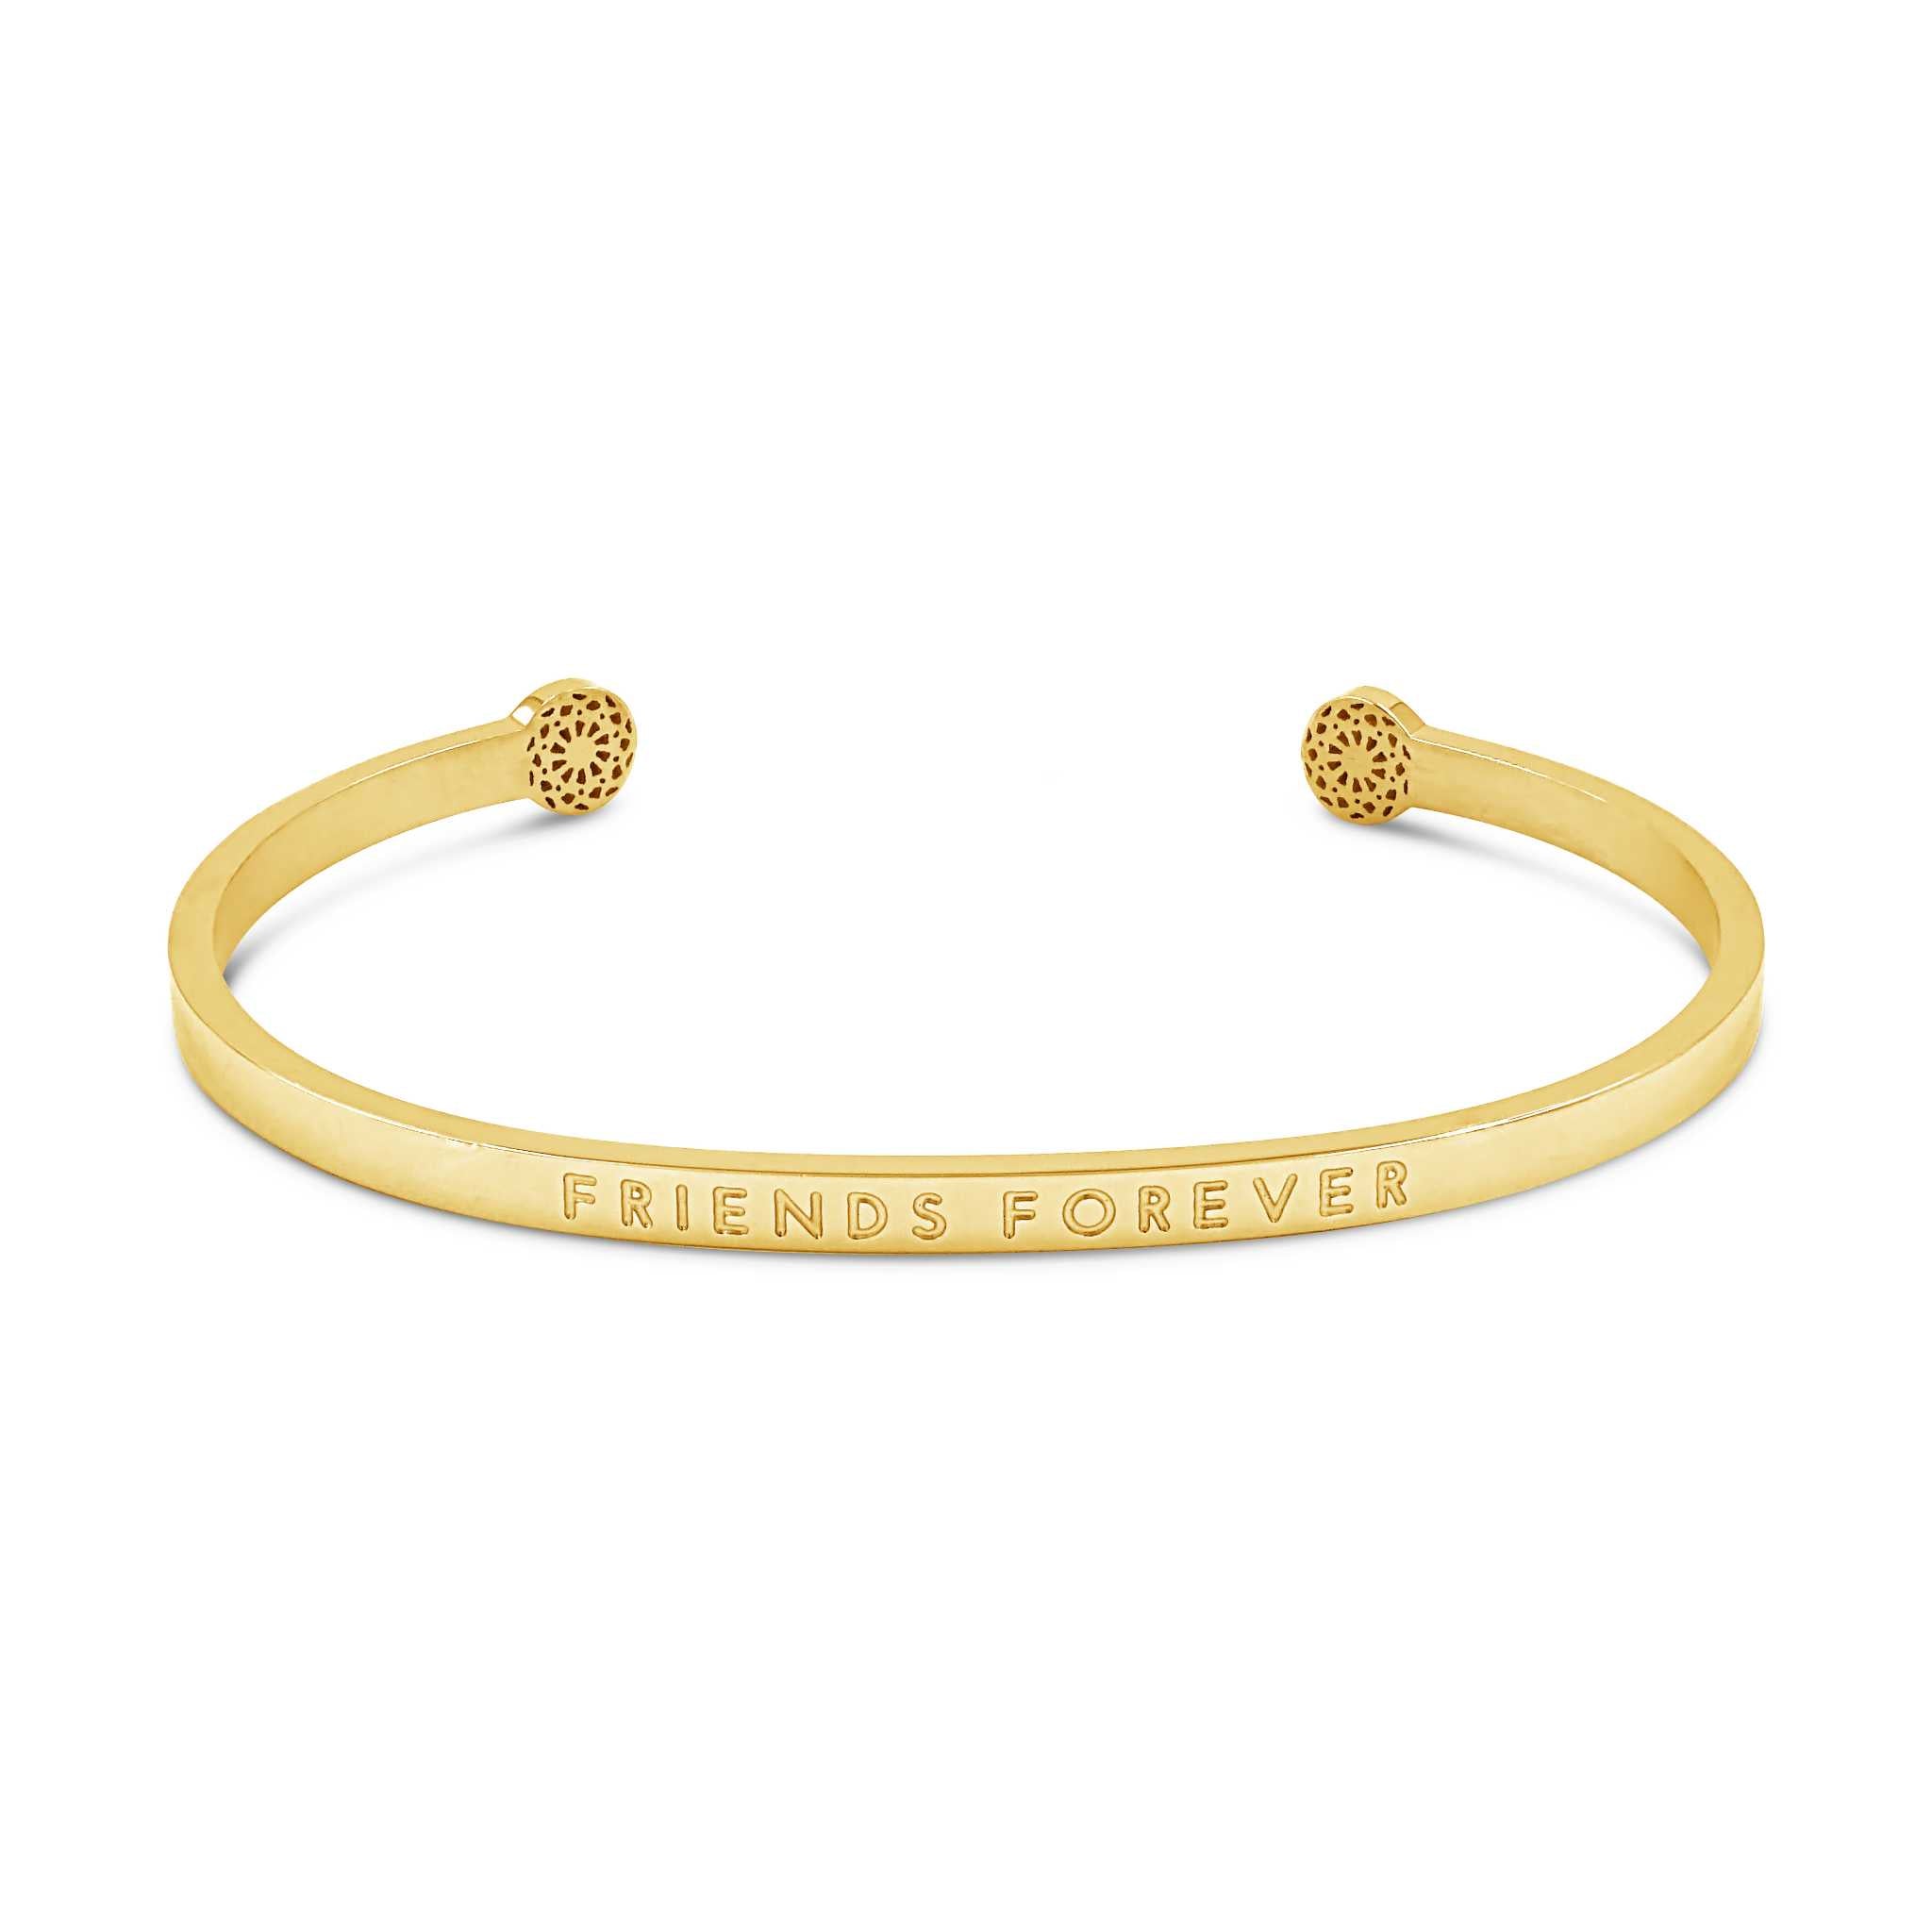 Father of the Bride Gift: Love Your Forever Bracelet – Family Giftables